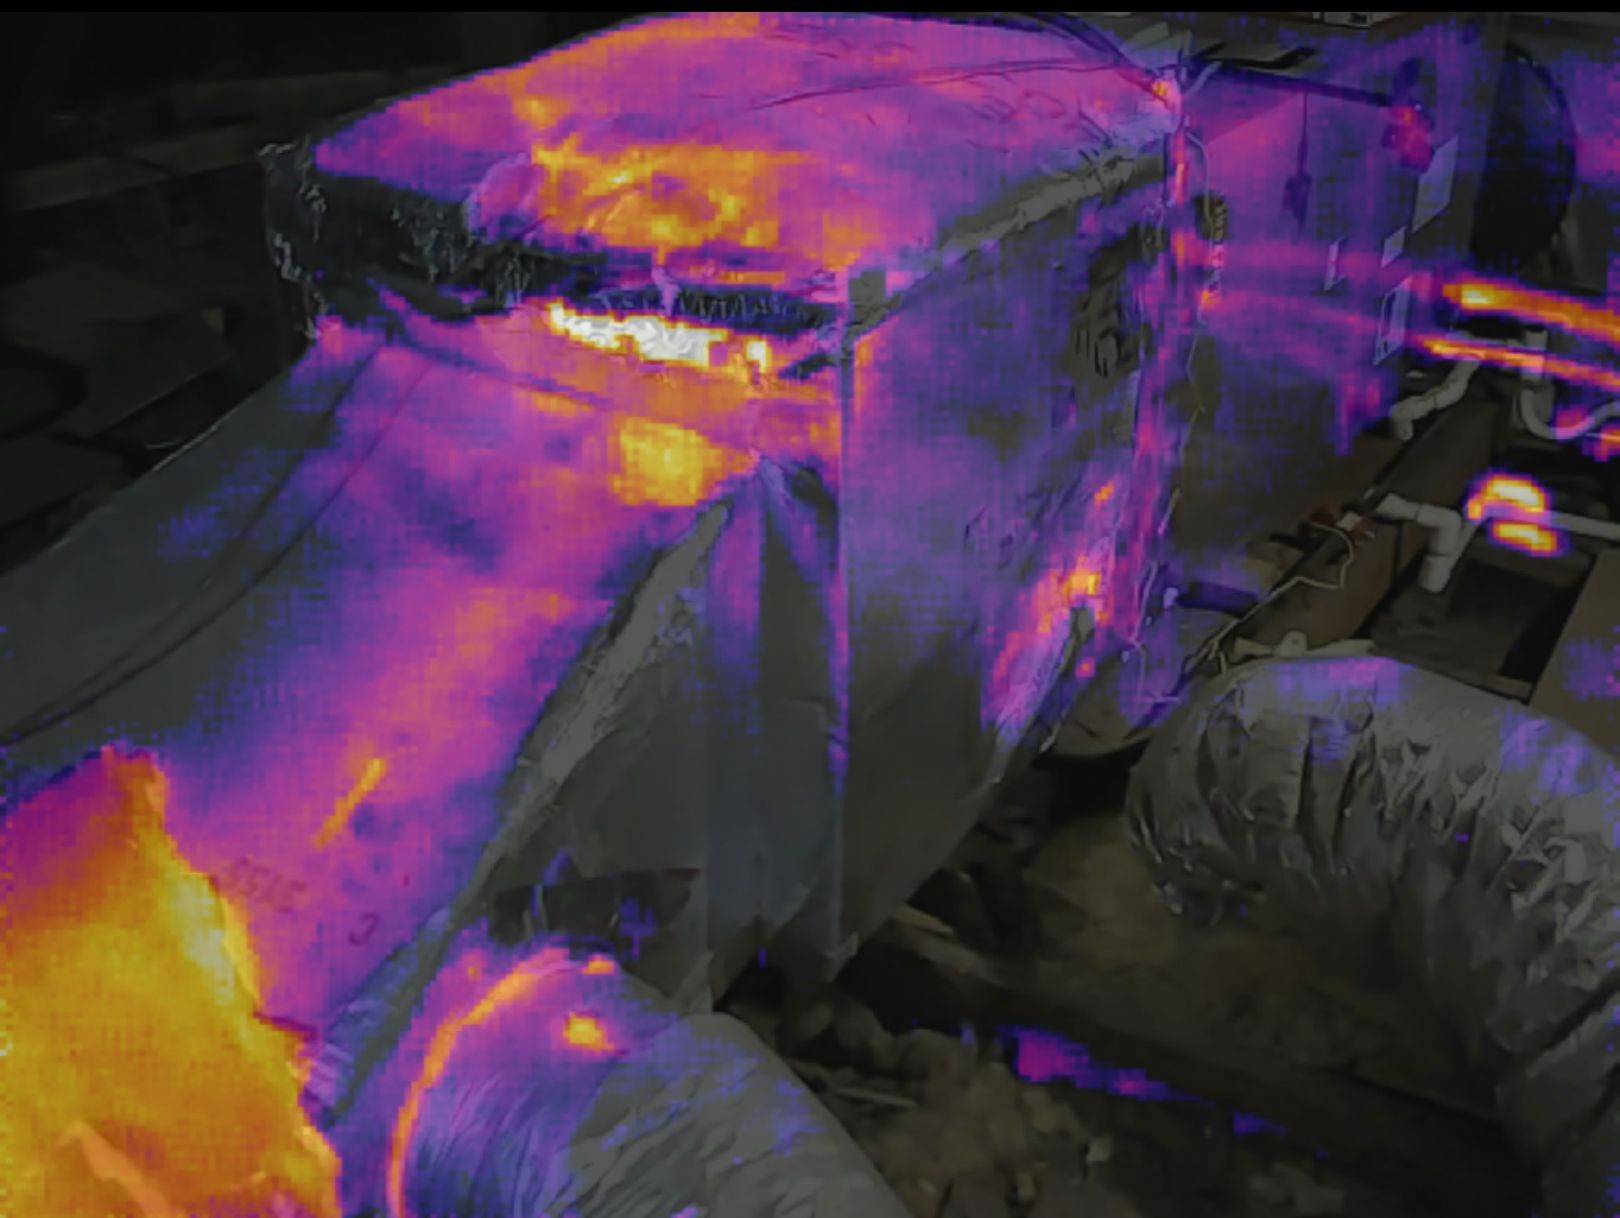 HVAC duct inefficiencies quickly identified during thermal scanning